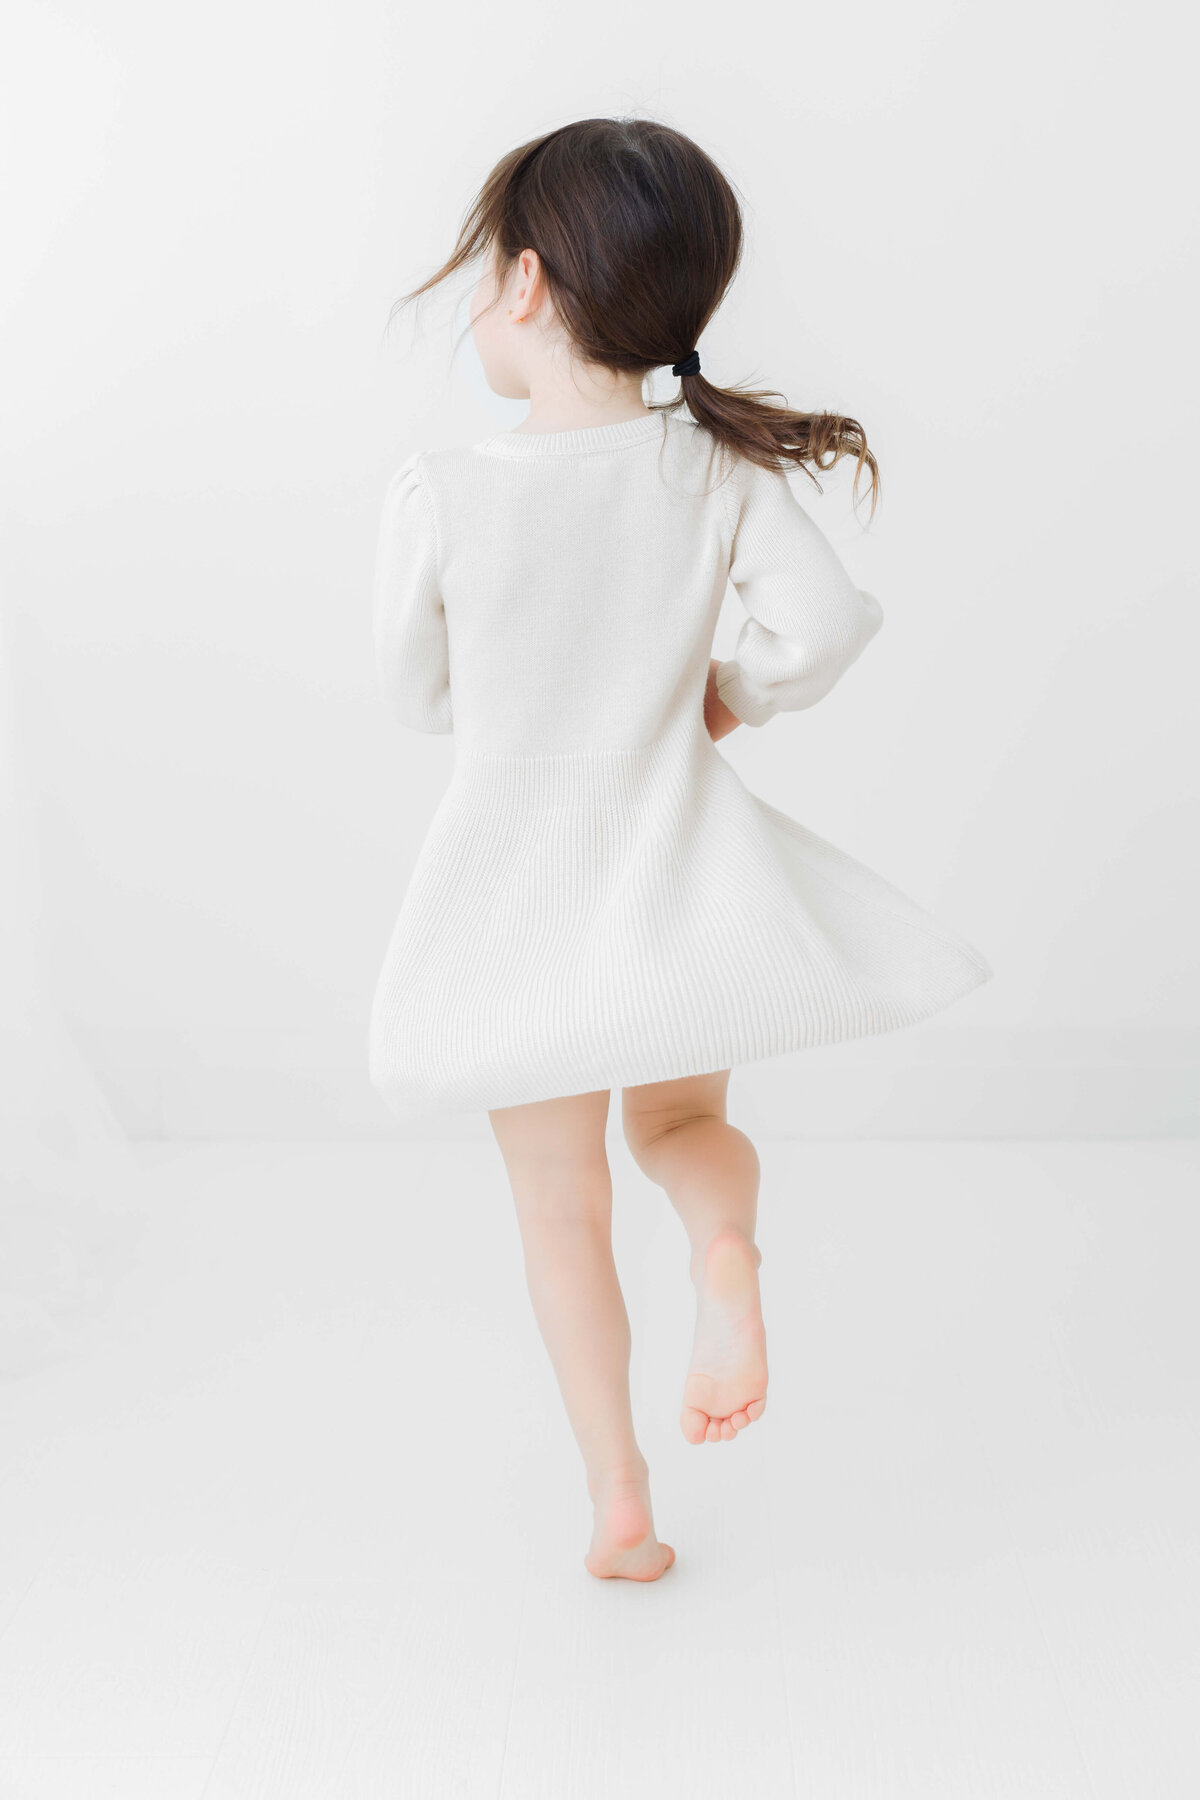 Young girl with brown ponytail and white dress dancing, captured in a studio by Collingwood family photographer Jennifer Walton